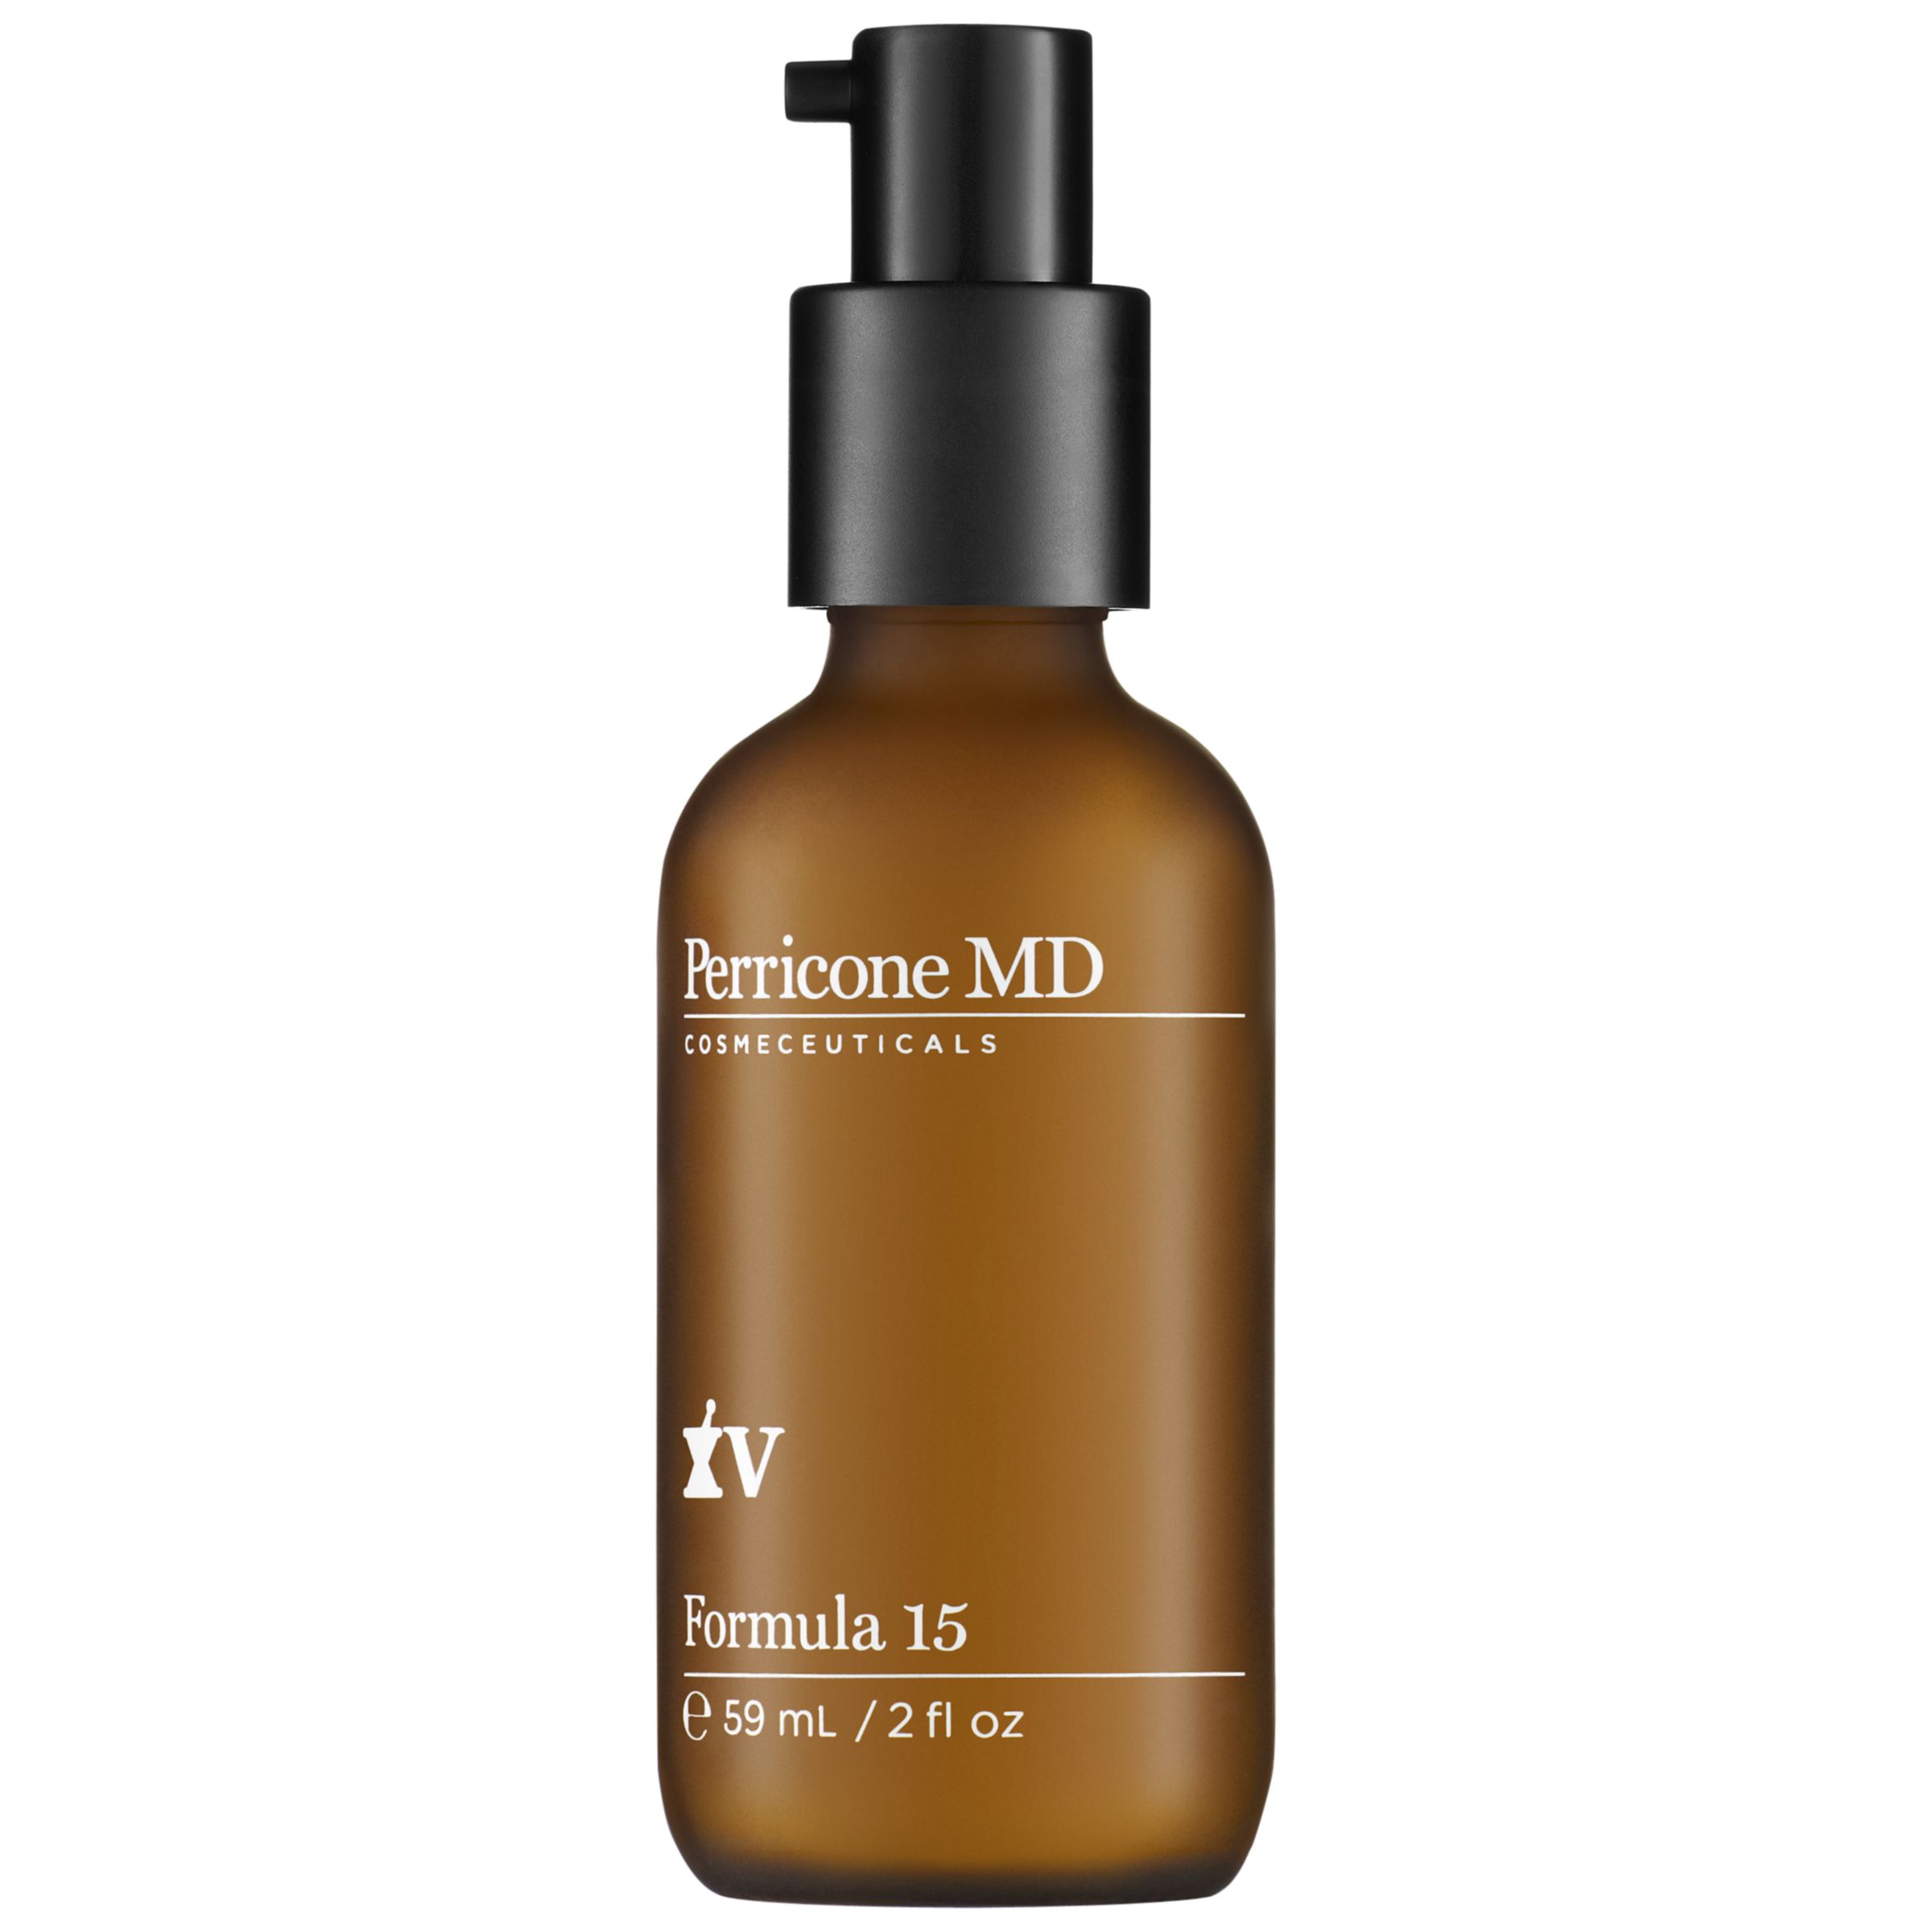 Perricone MD 'Formula 15' Face Firming Activator